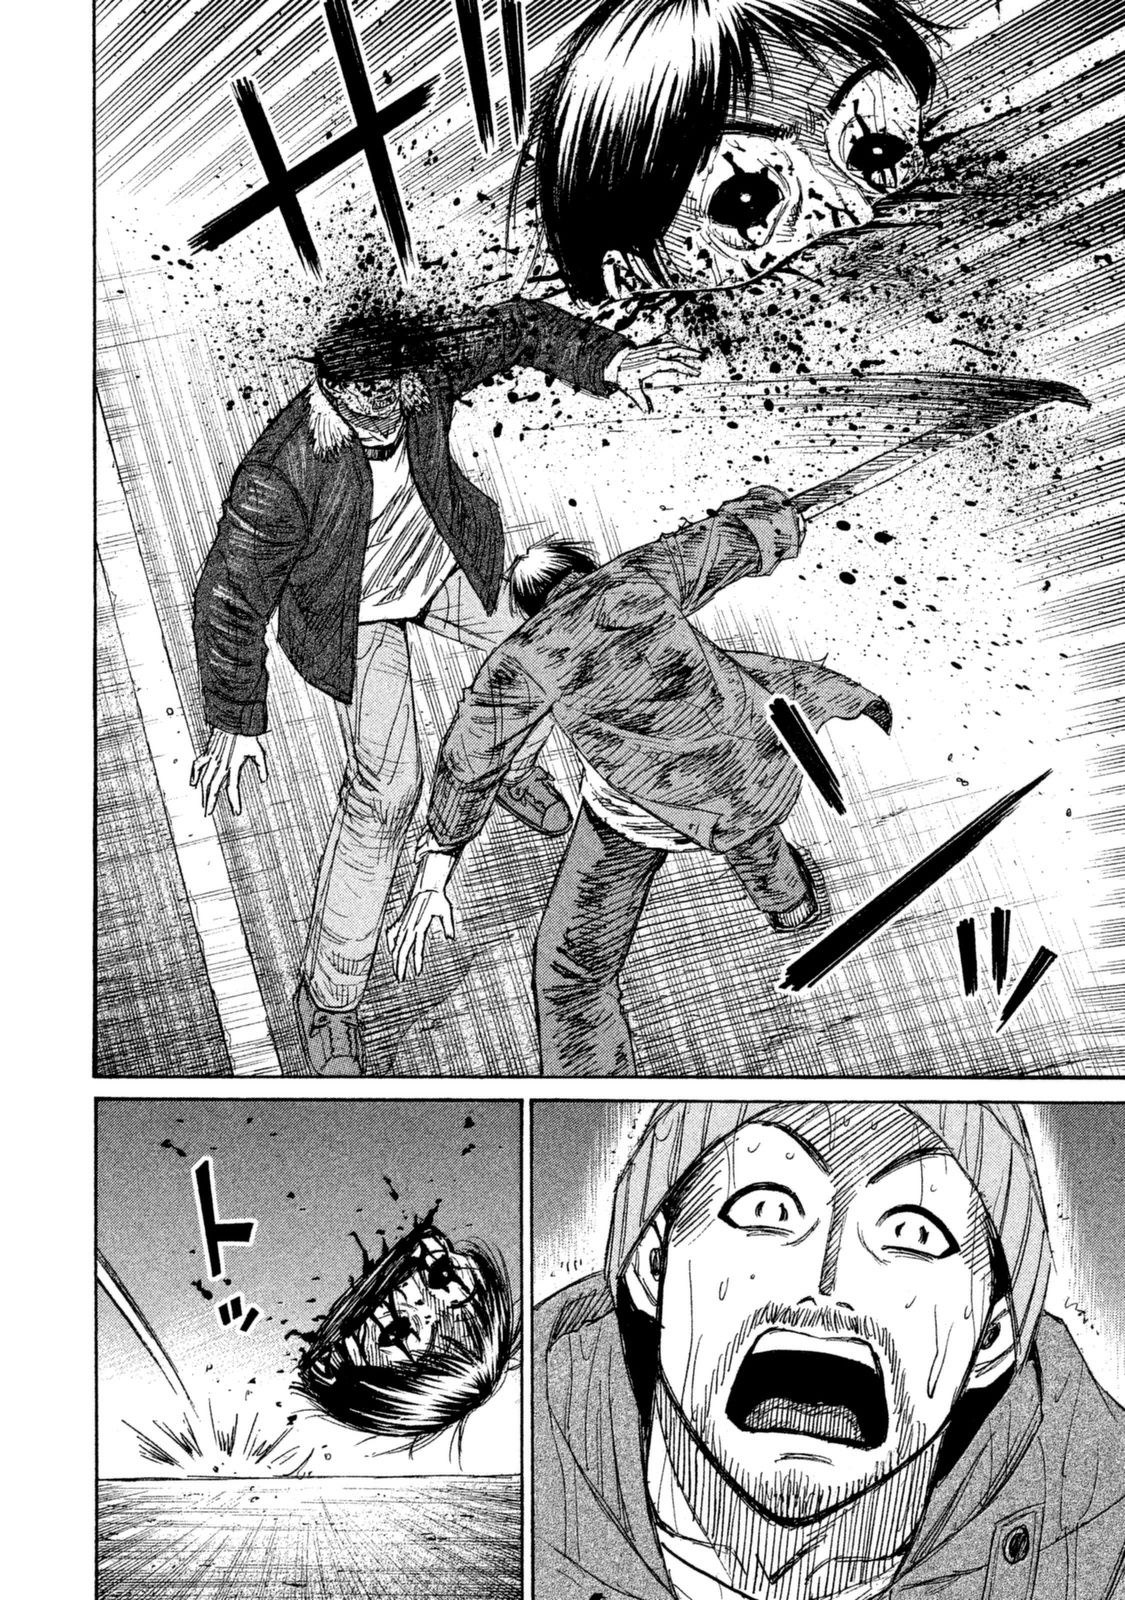 Higanjima - 48 Days Later Vol.1 Chapter 3: The Artificial Hand - Picture 2